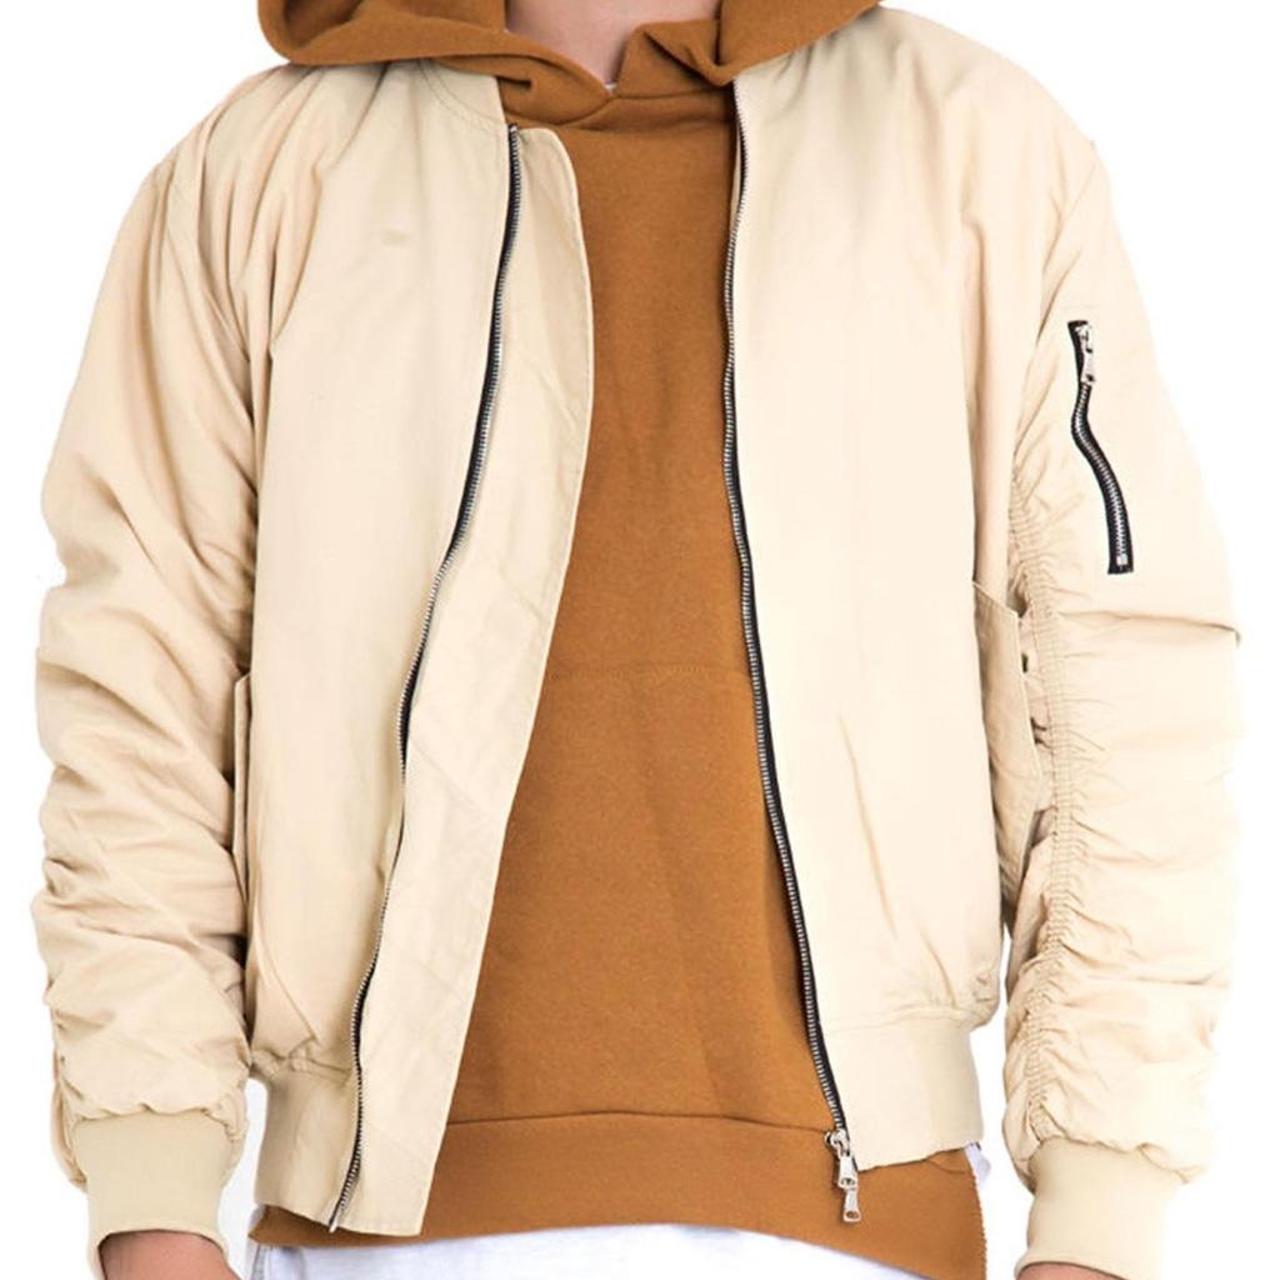 Product Image 1 - Lifted Anchors Cream Bomber Jacket
Price: